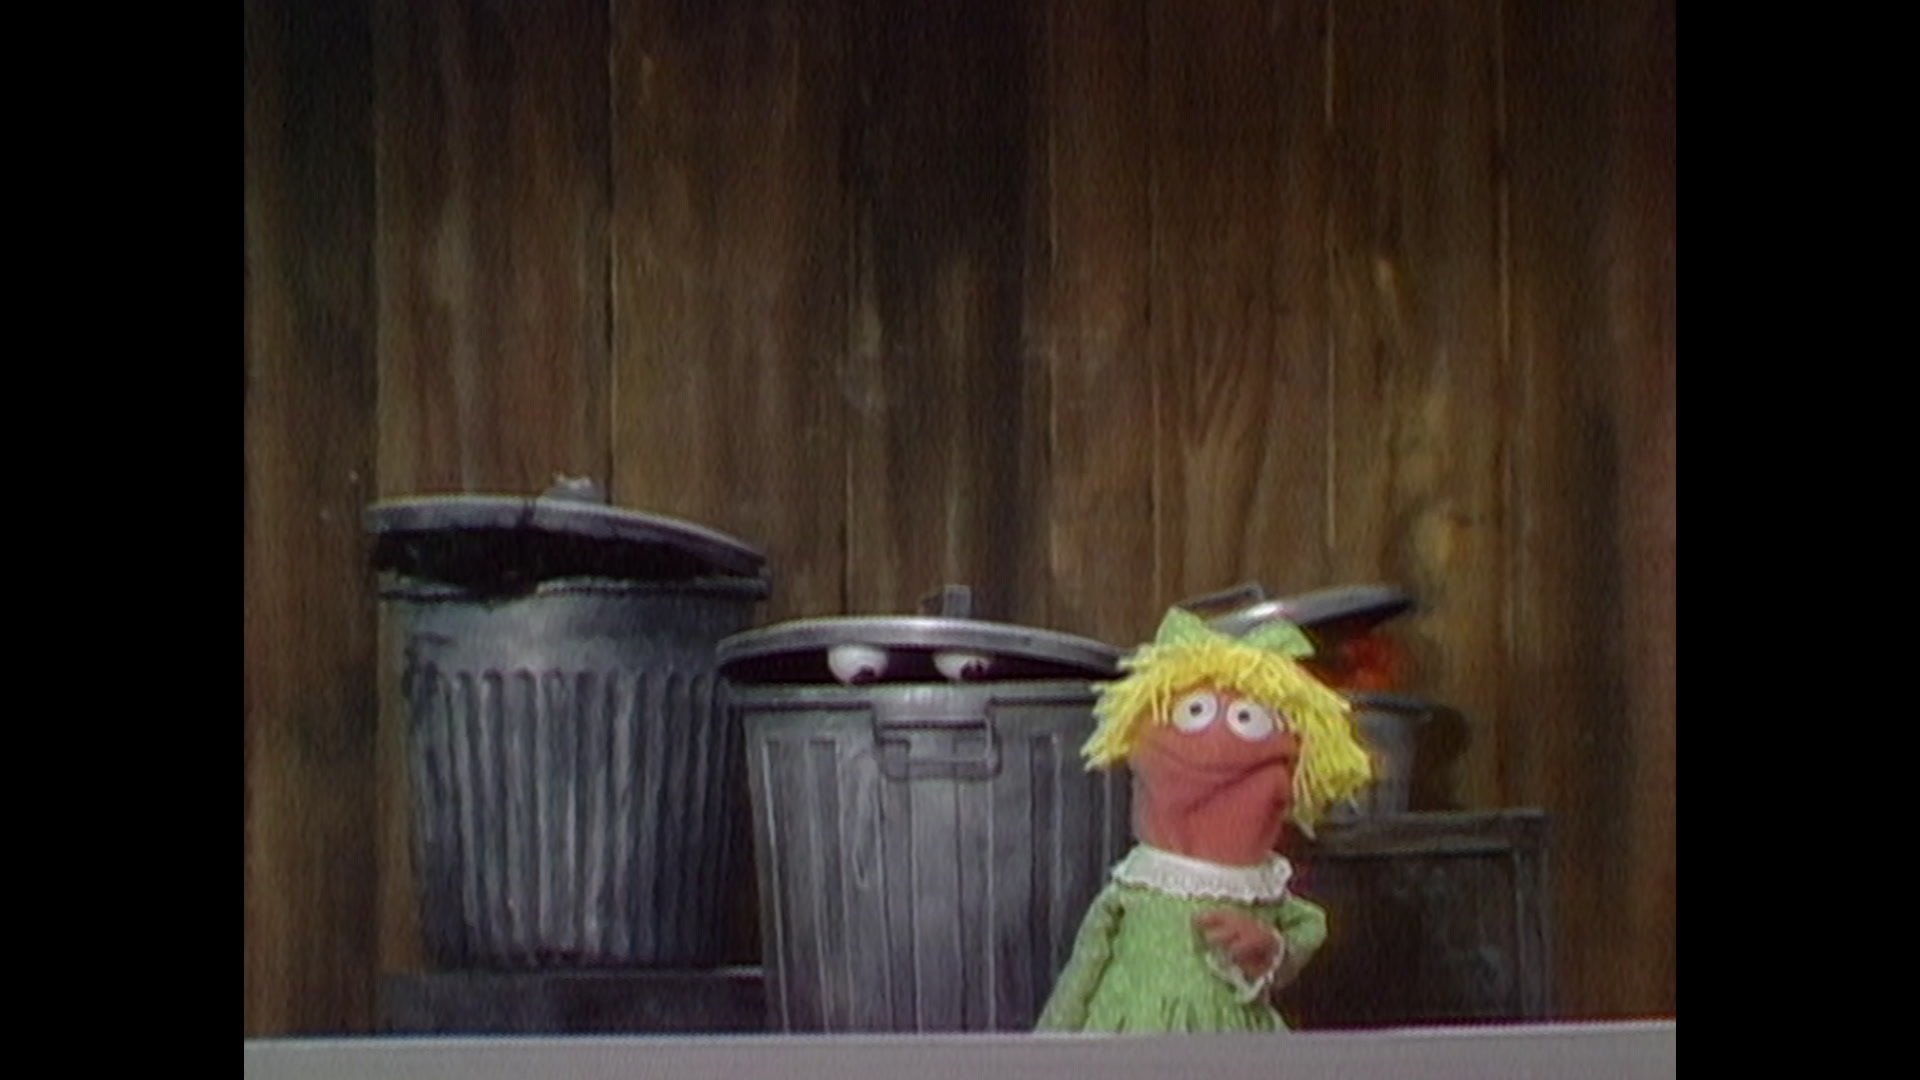 The Monster Trash Can Dance